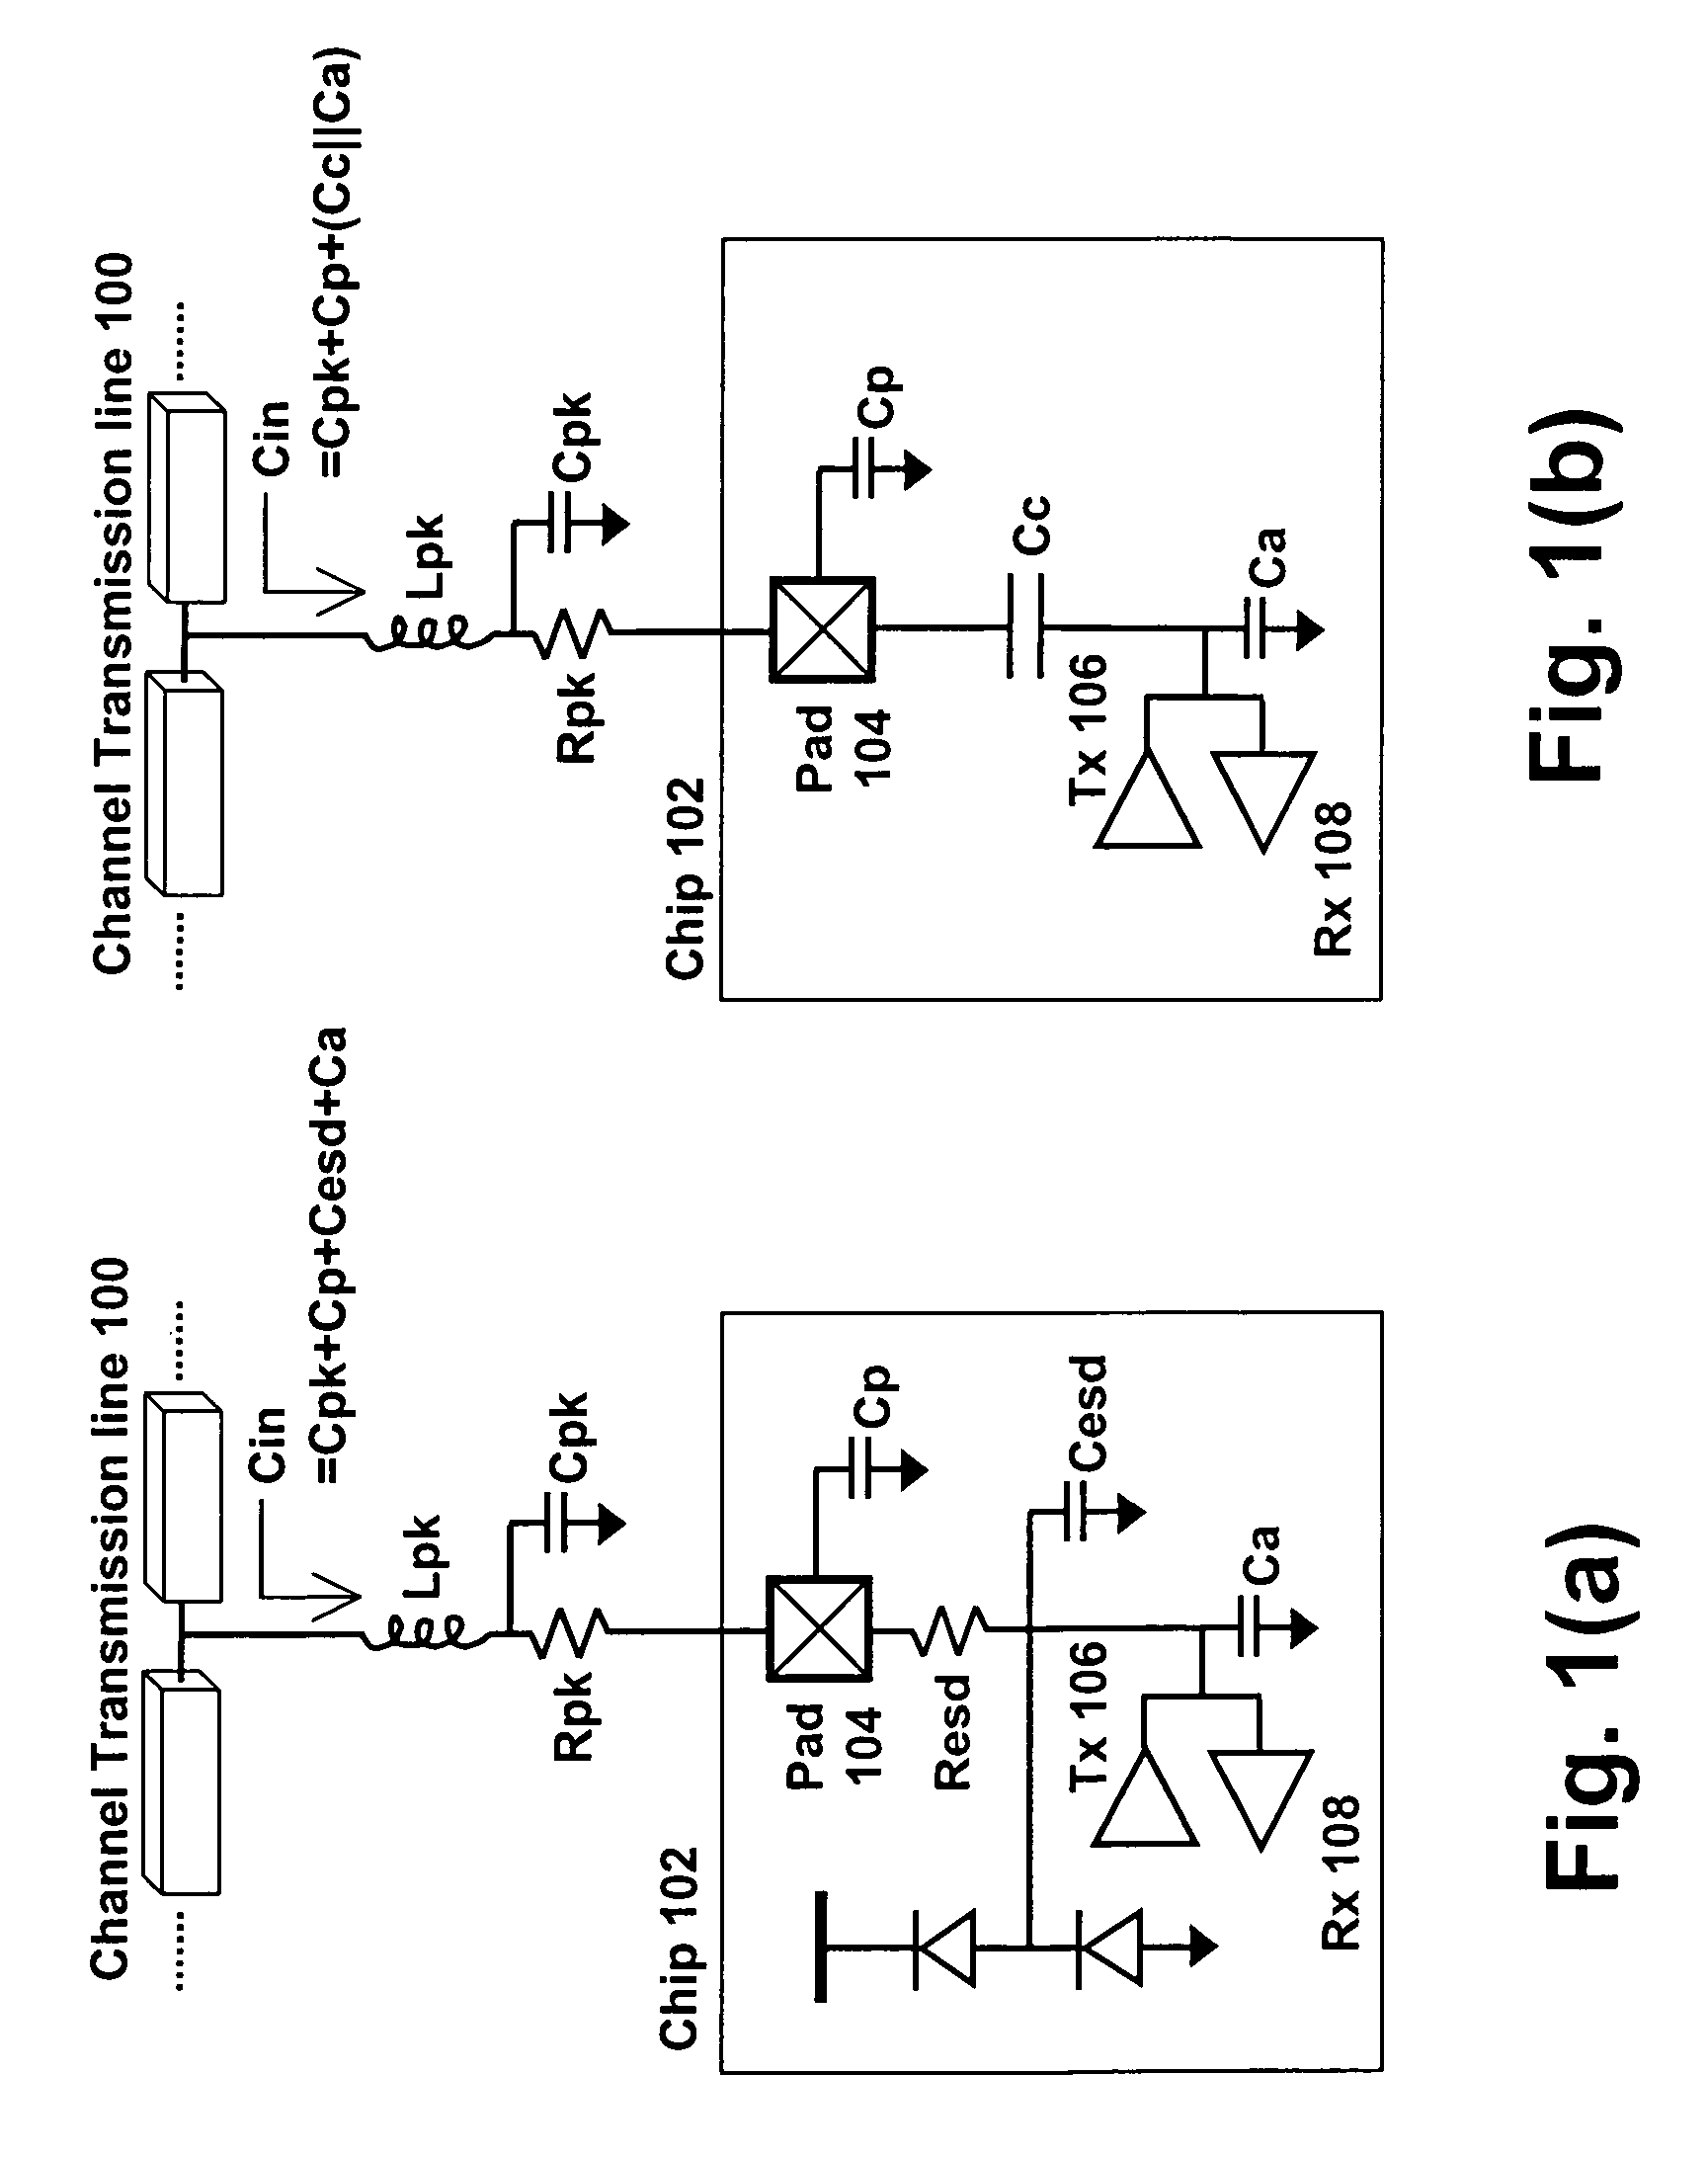 Capacitively coupled pulsed signaling bus interface